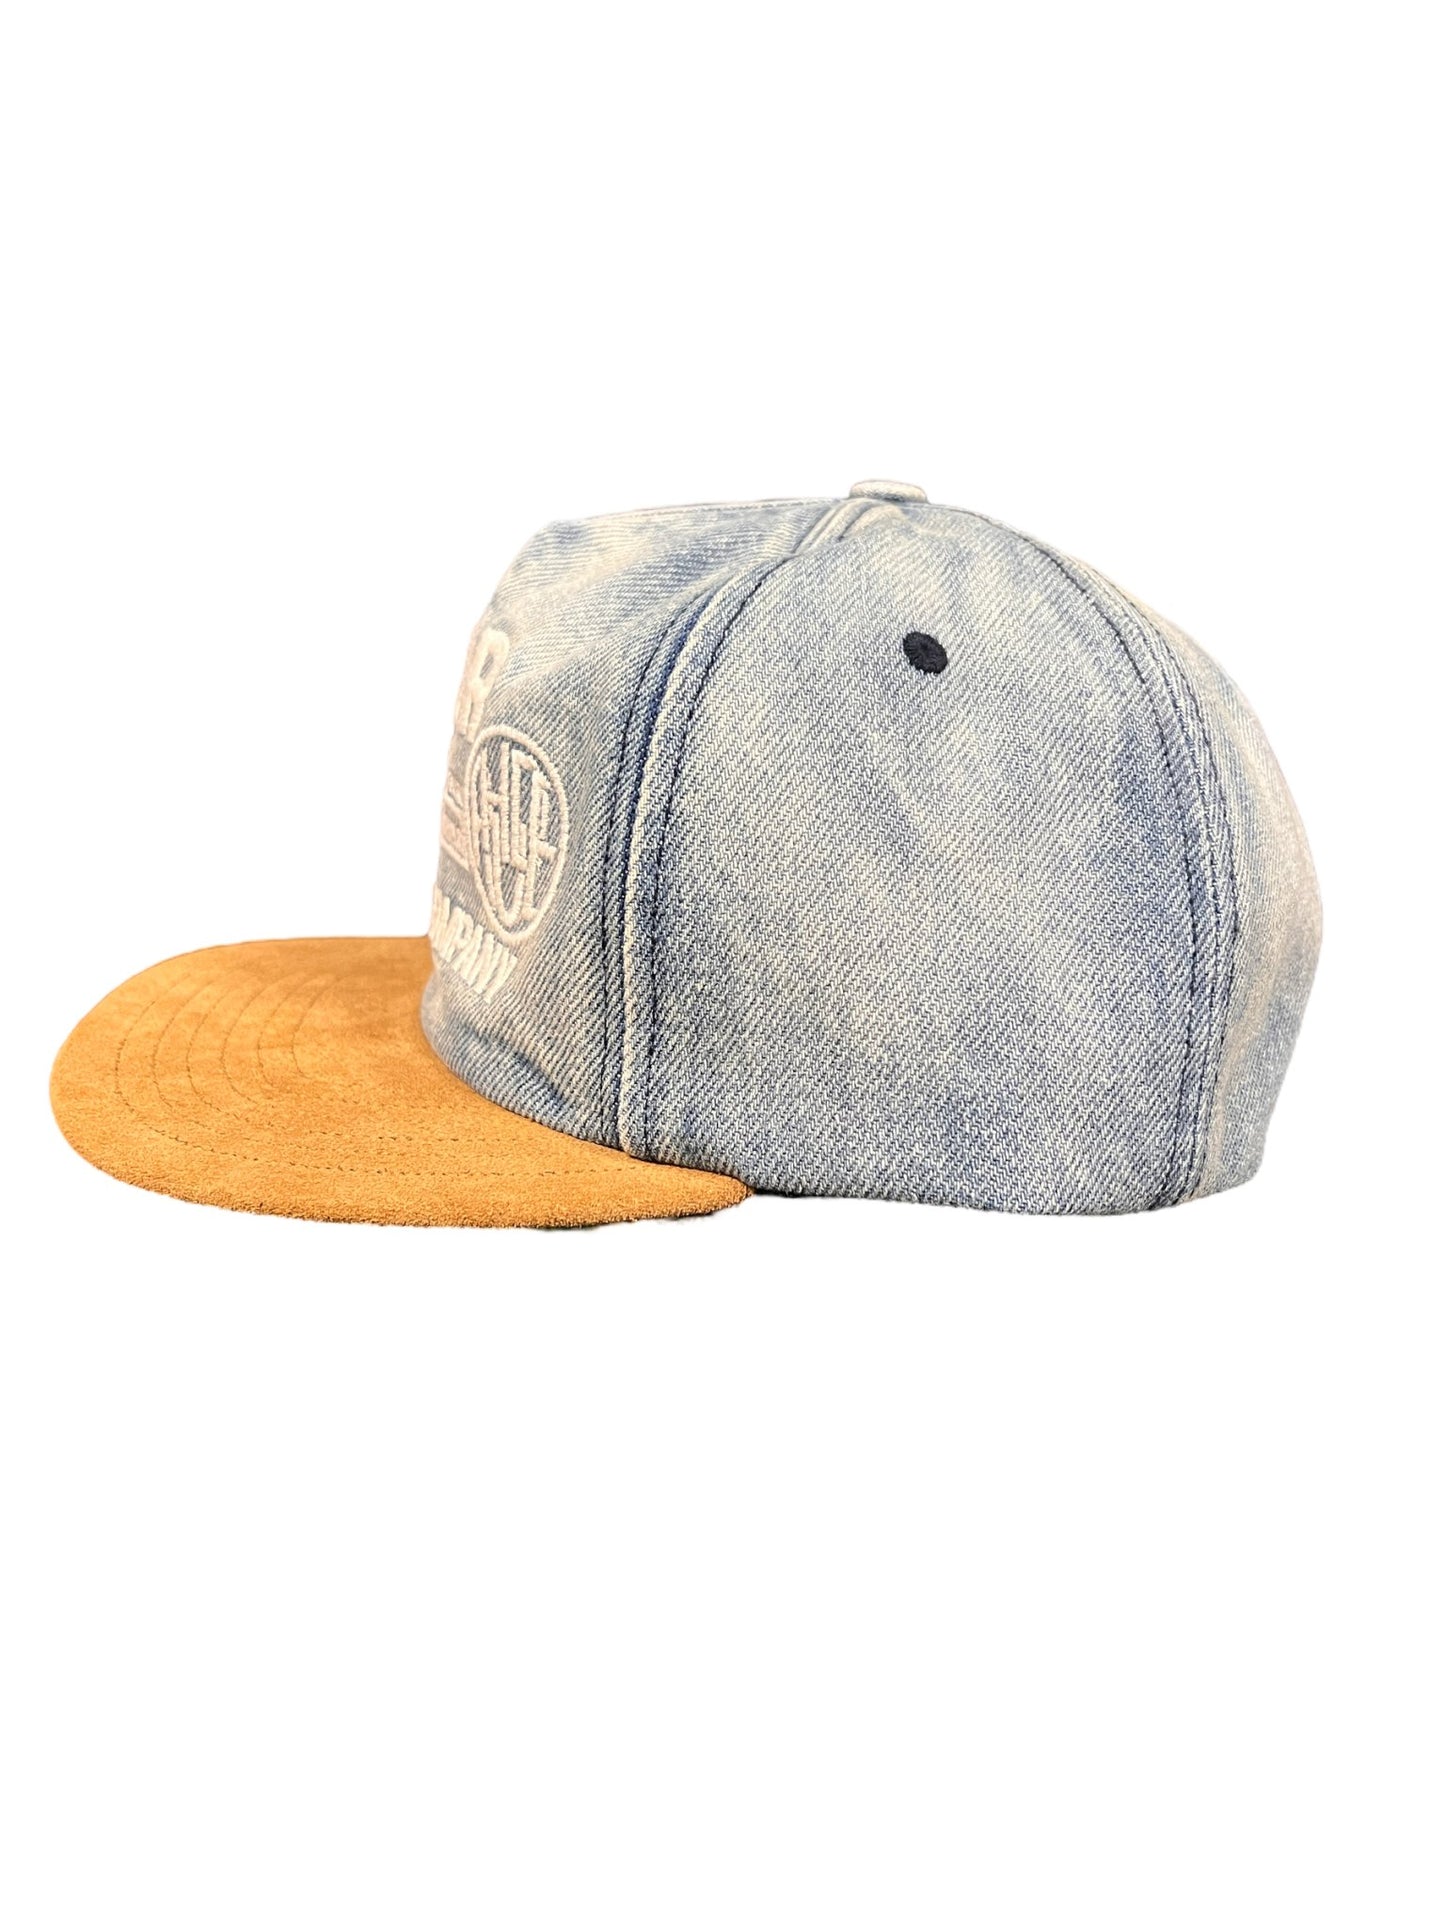 A RHUDE MOTOR OIL hat with an adjustable strap and a tan brim.